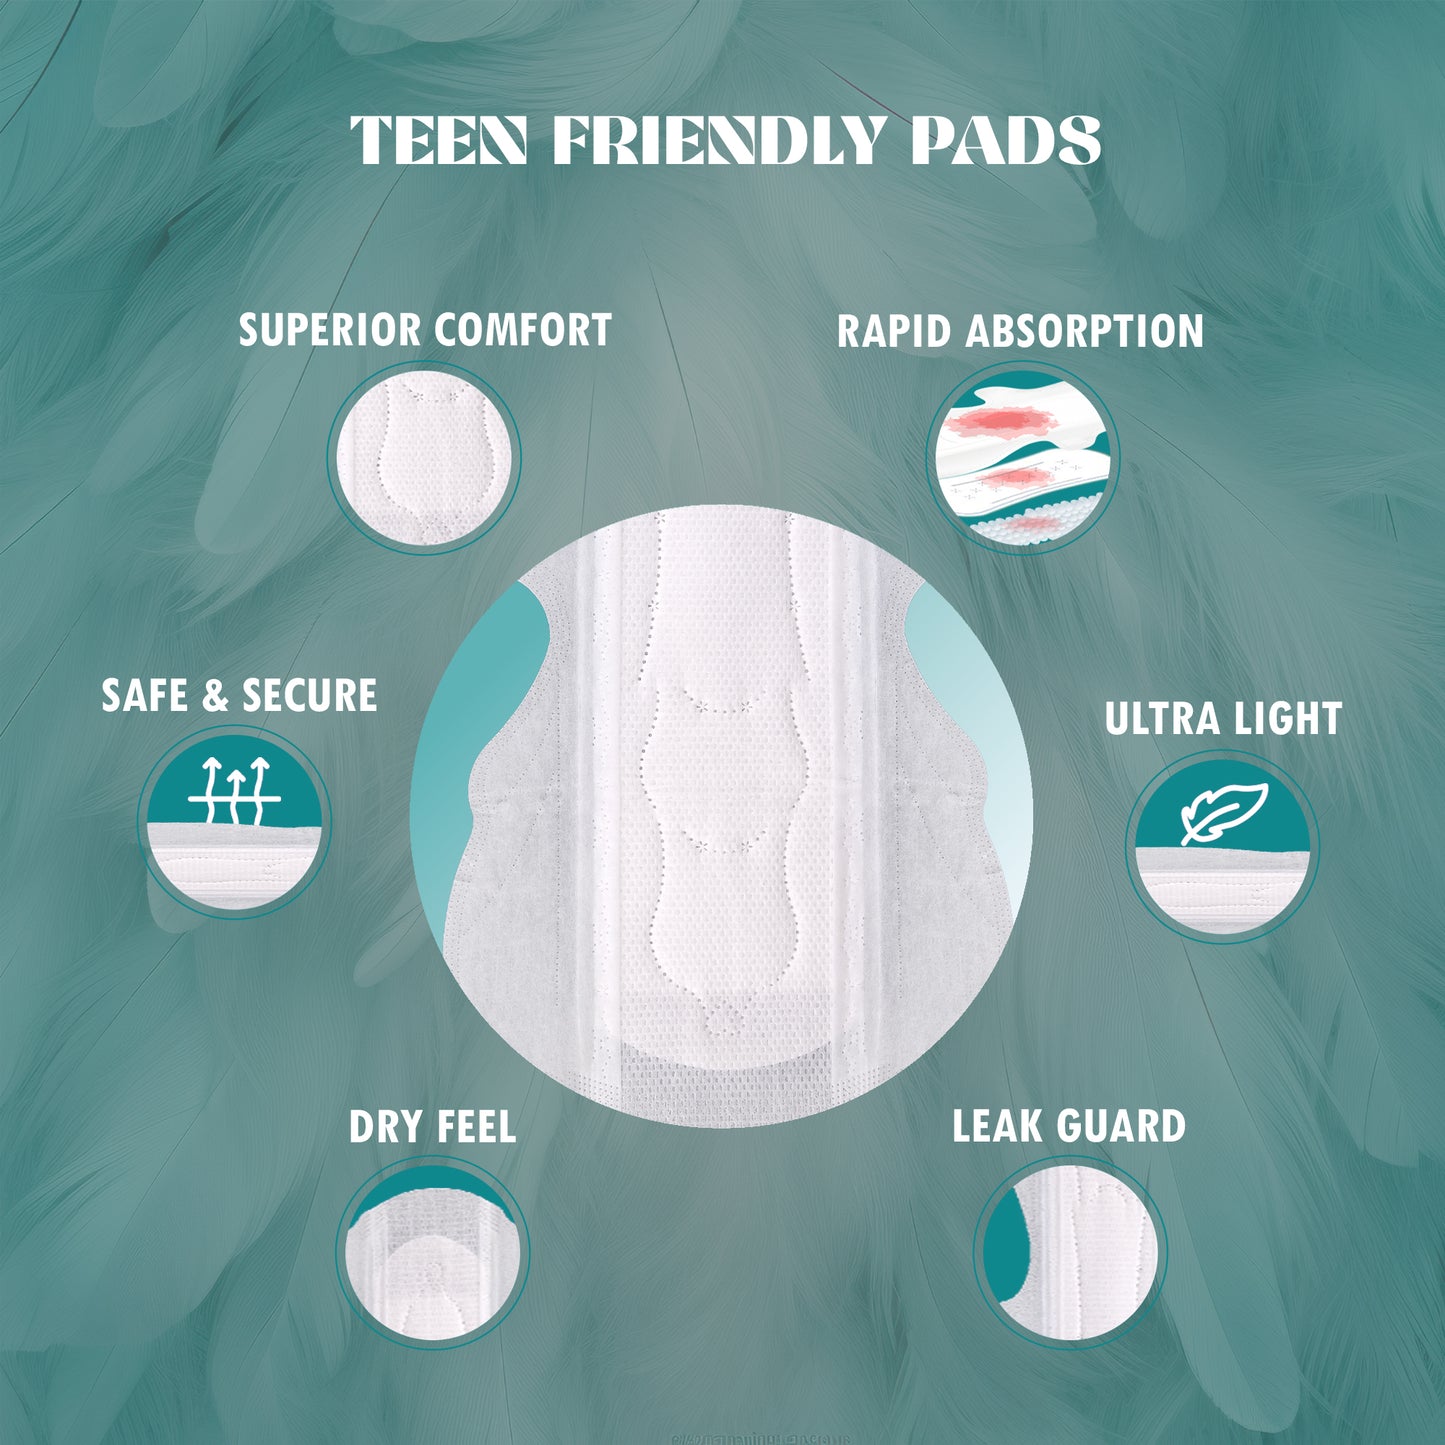 Time Ultra Feather Sanitary Pads | Superior Absorption  | Teen Pads | Rash free | Dry Feel